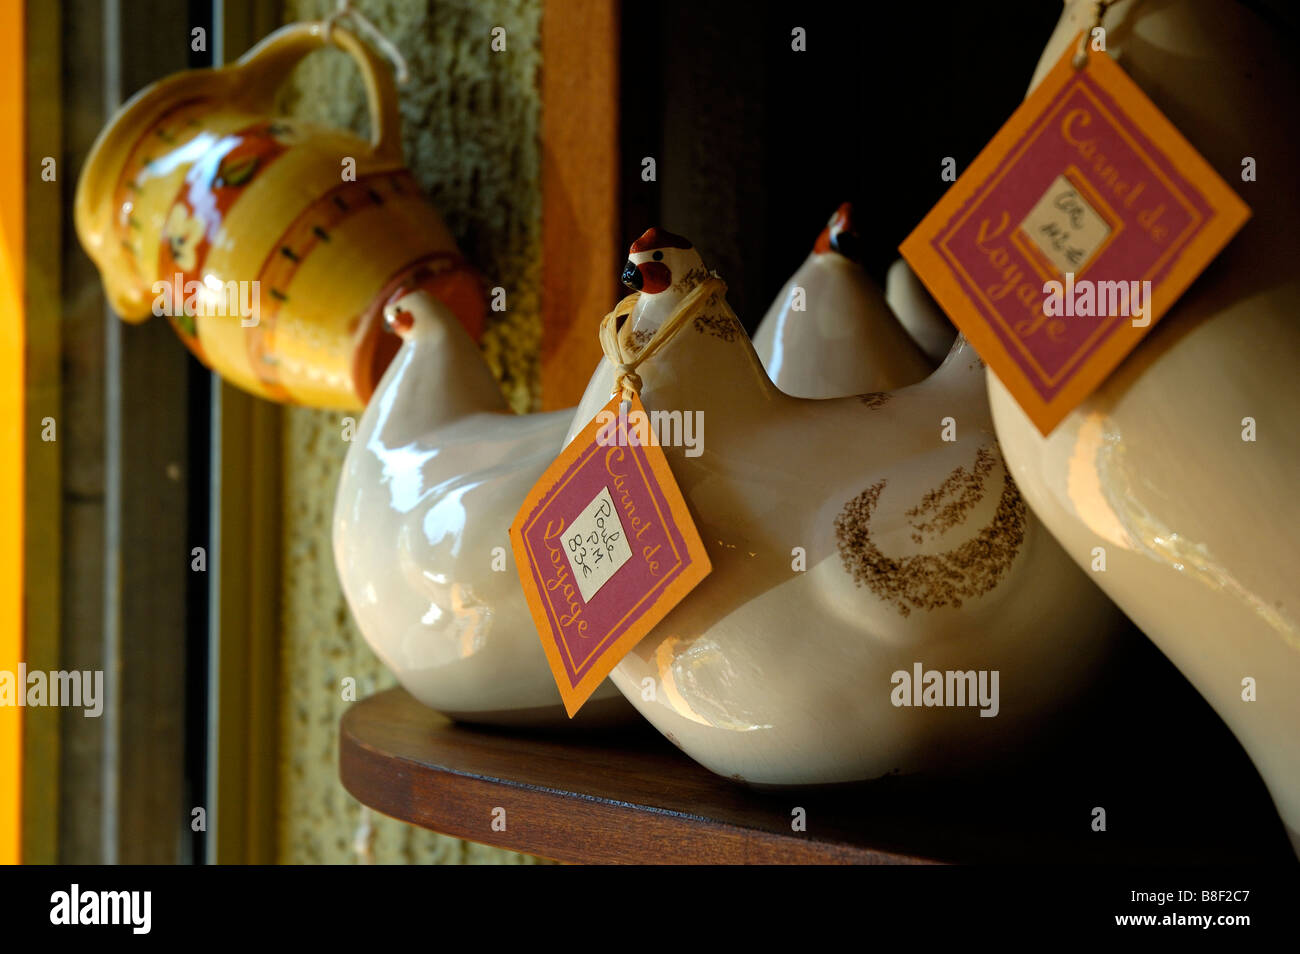 Pottery chickens on display at a shop in Arles, Provence, France Stock Photo